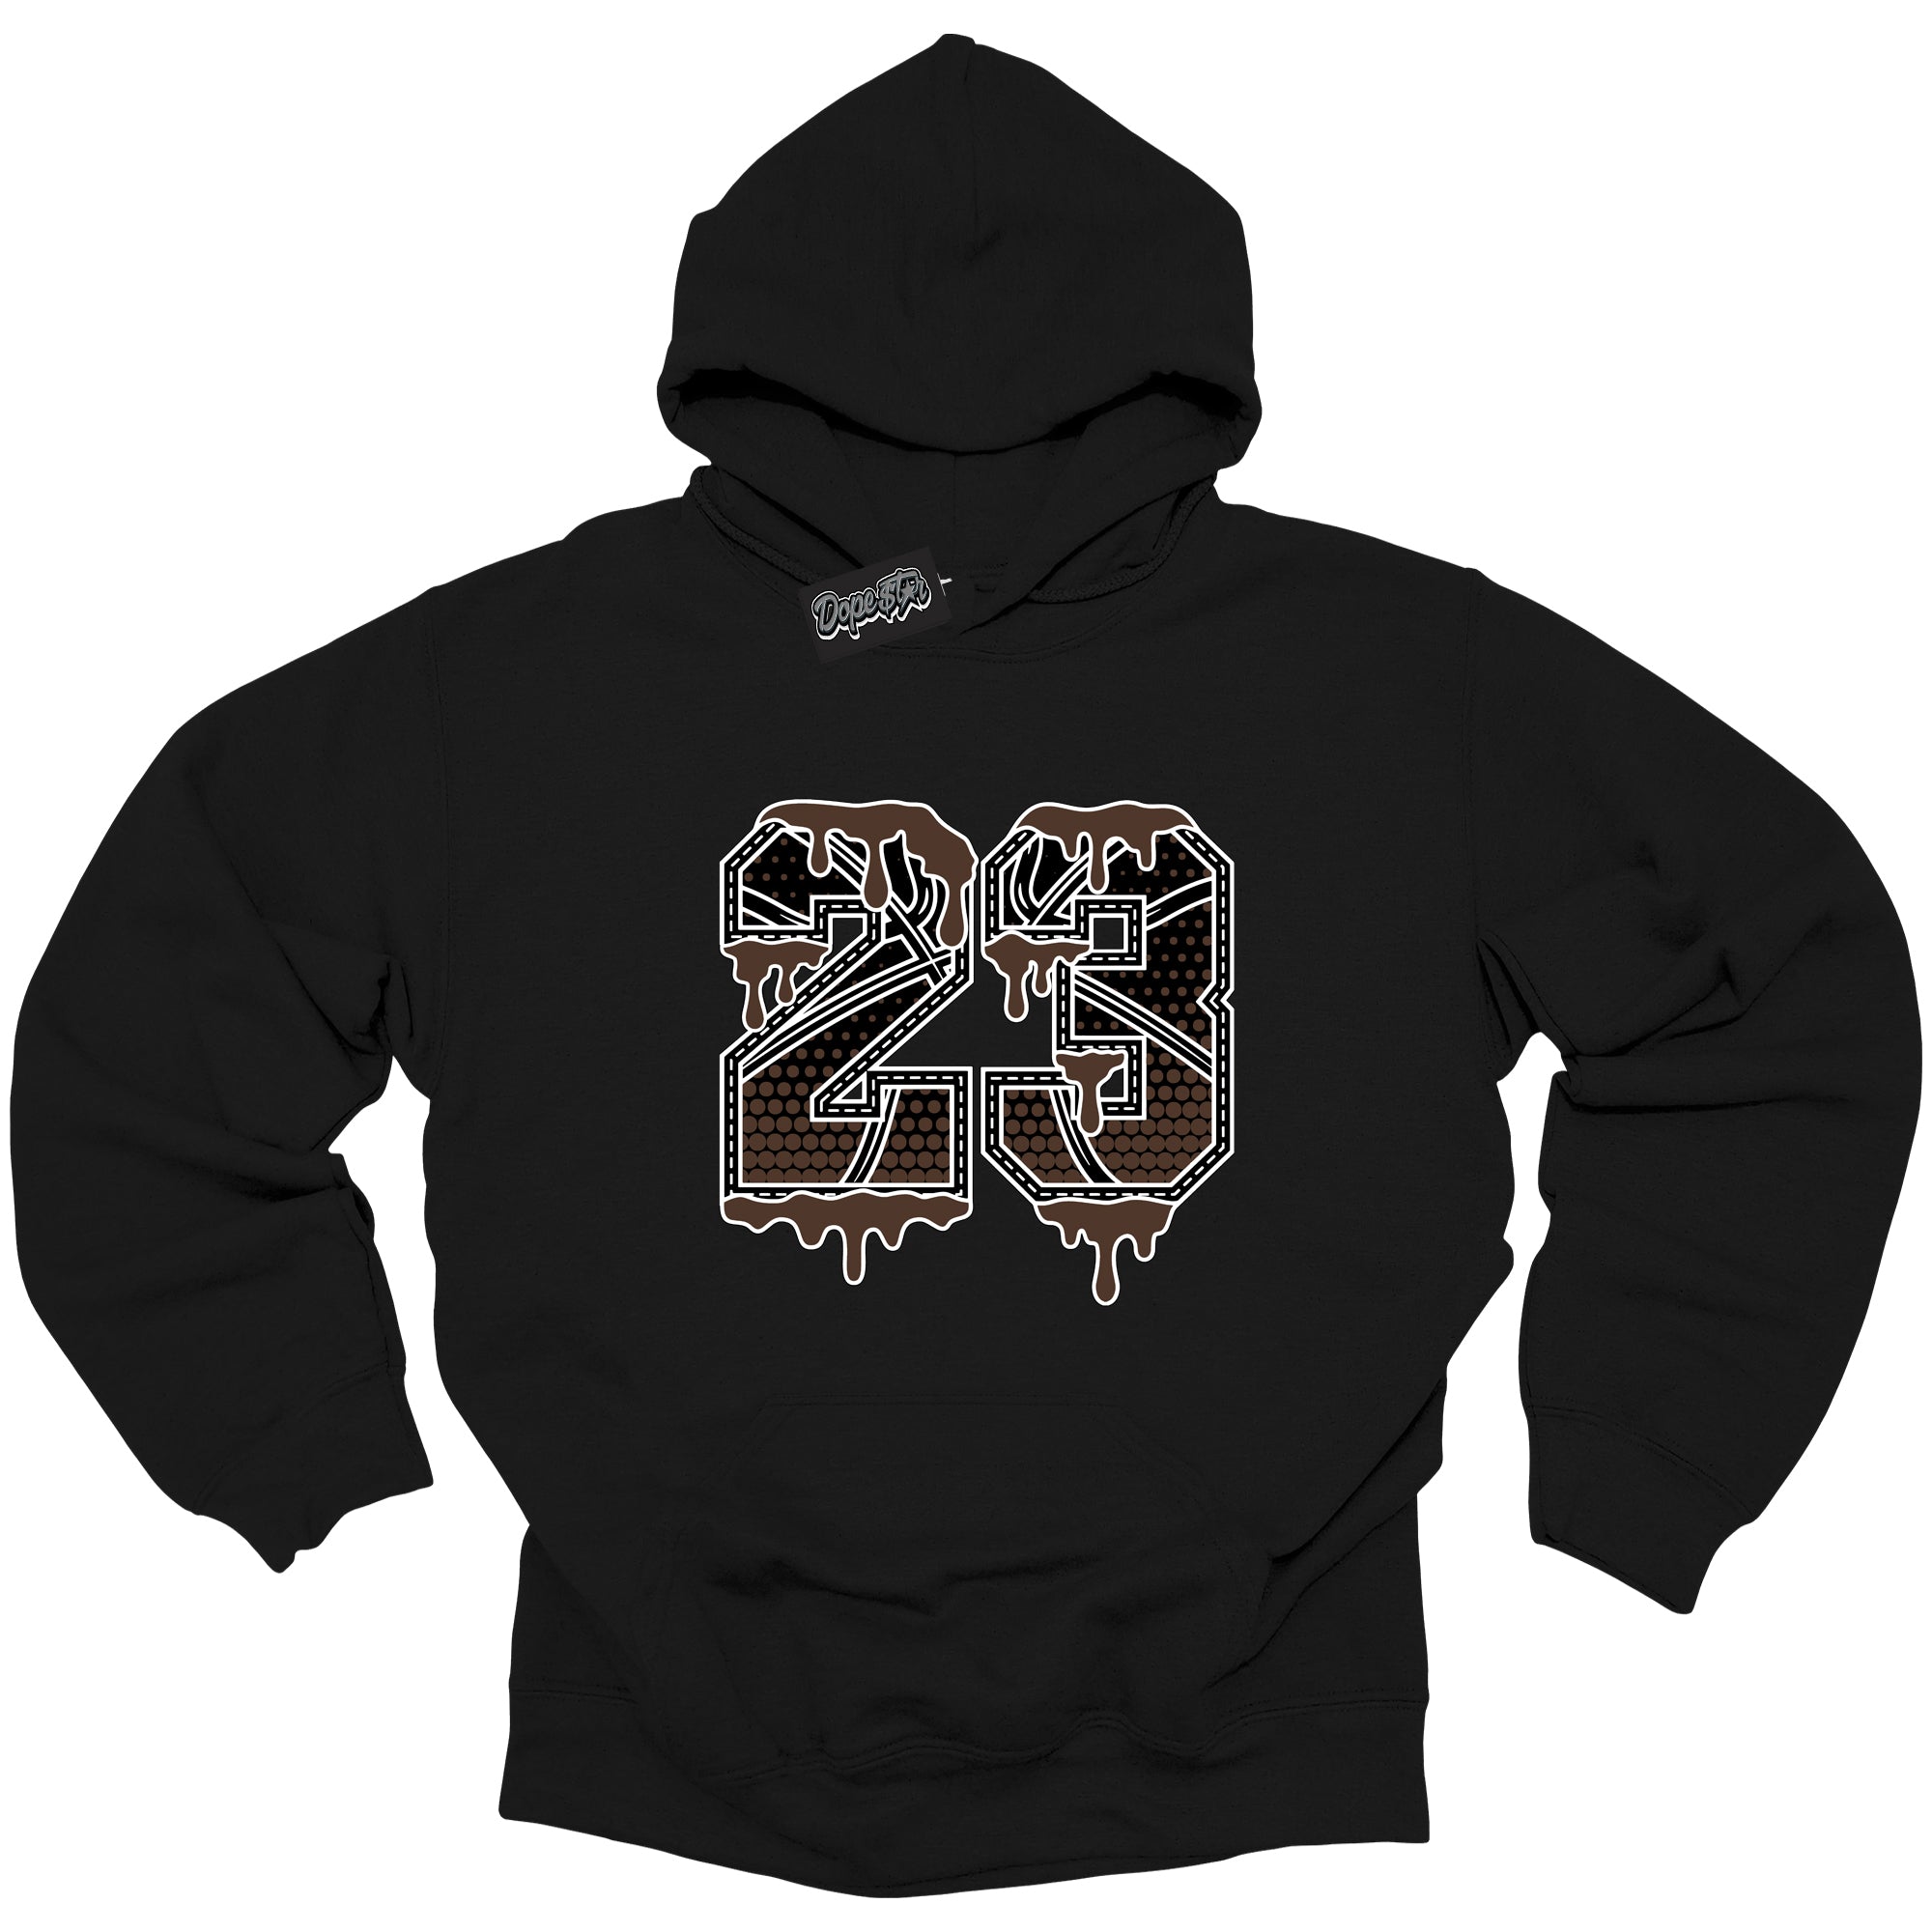 Cool Black Graphic DopeStar Hoodie with “ 23 Ball “ print, that perfectly matches Palomino 1s sneakers